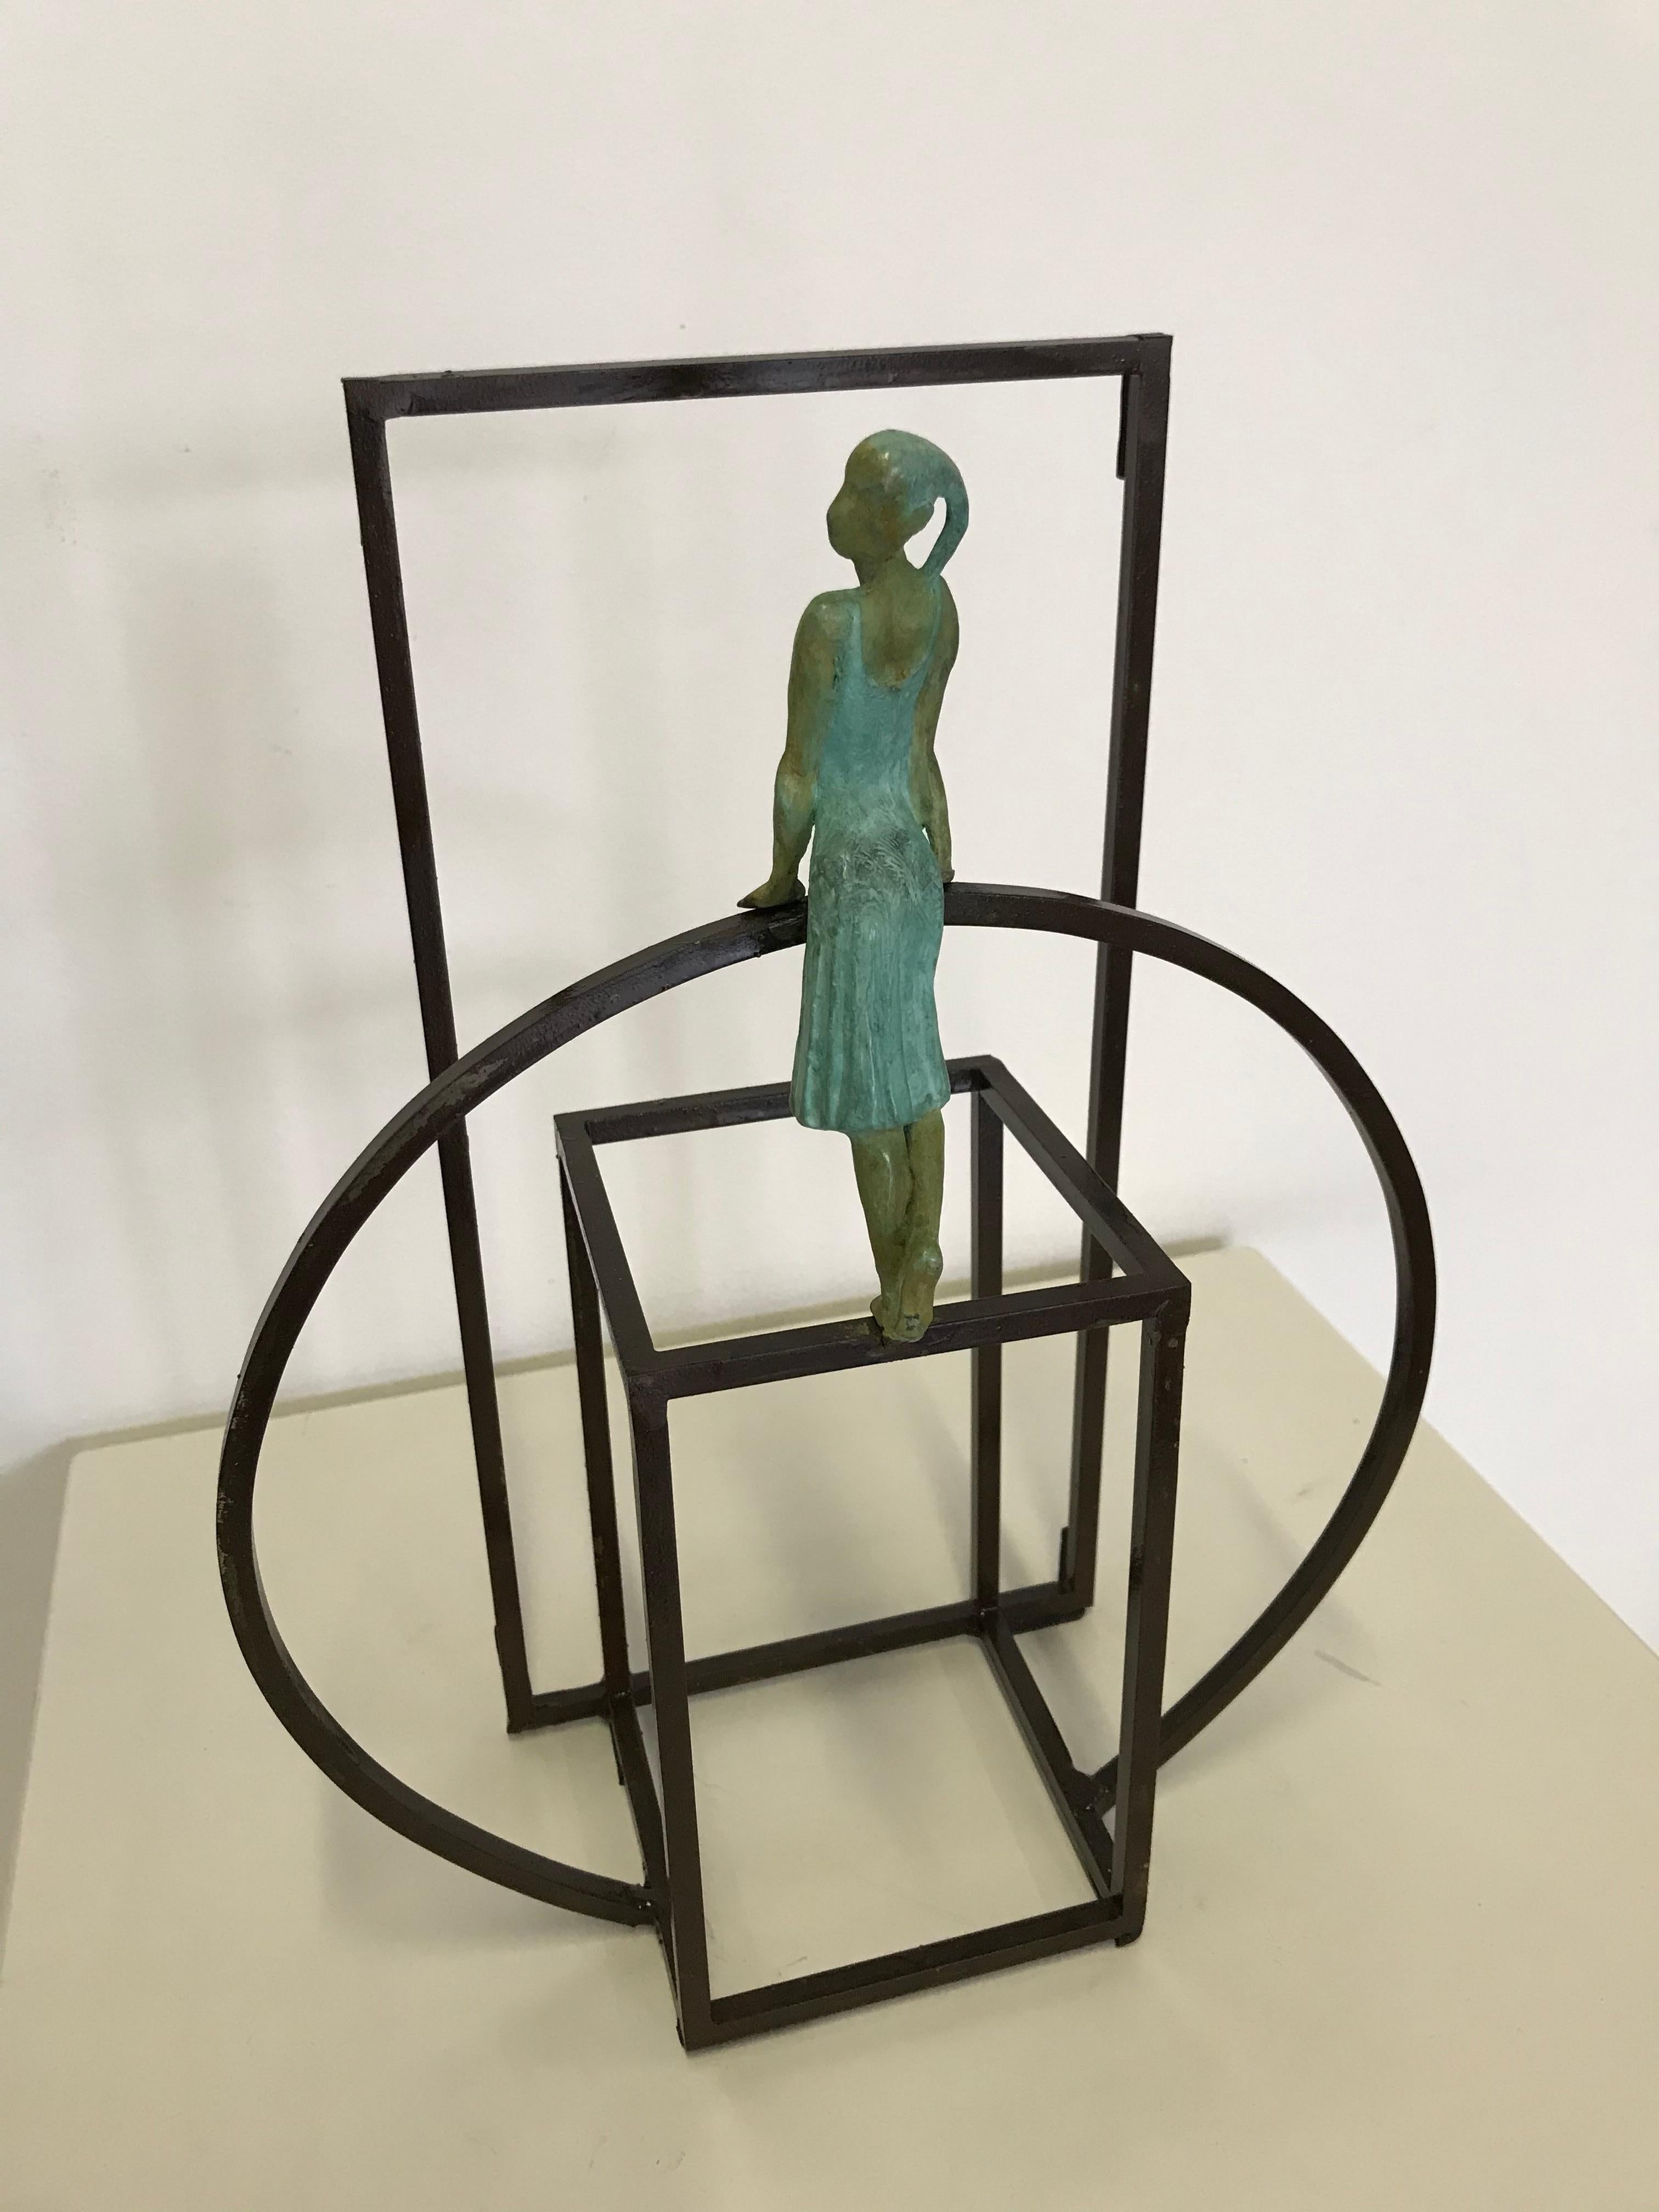 Cuba Mambo is a bronze sculpture with green patina, it is connected to a steel base. The edition size is 50. This sculpture stands on shelf as well as be hung on wall.  This sculpture is part of the Cuba Series of Joan Artigas which is inspired by